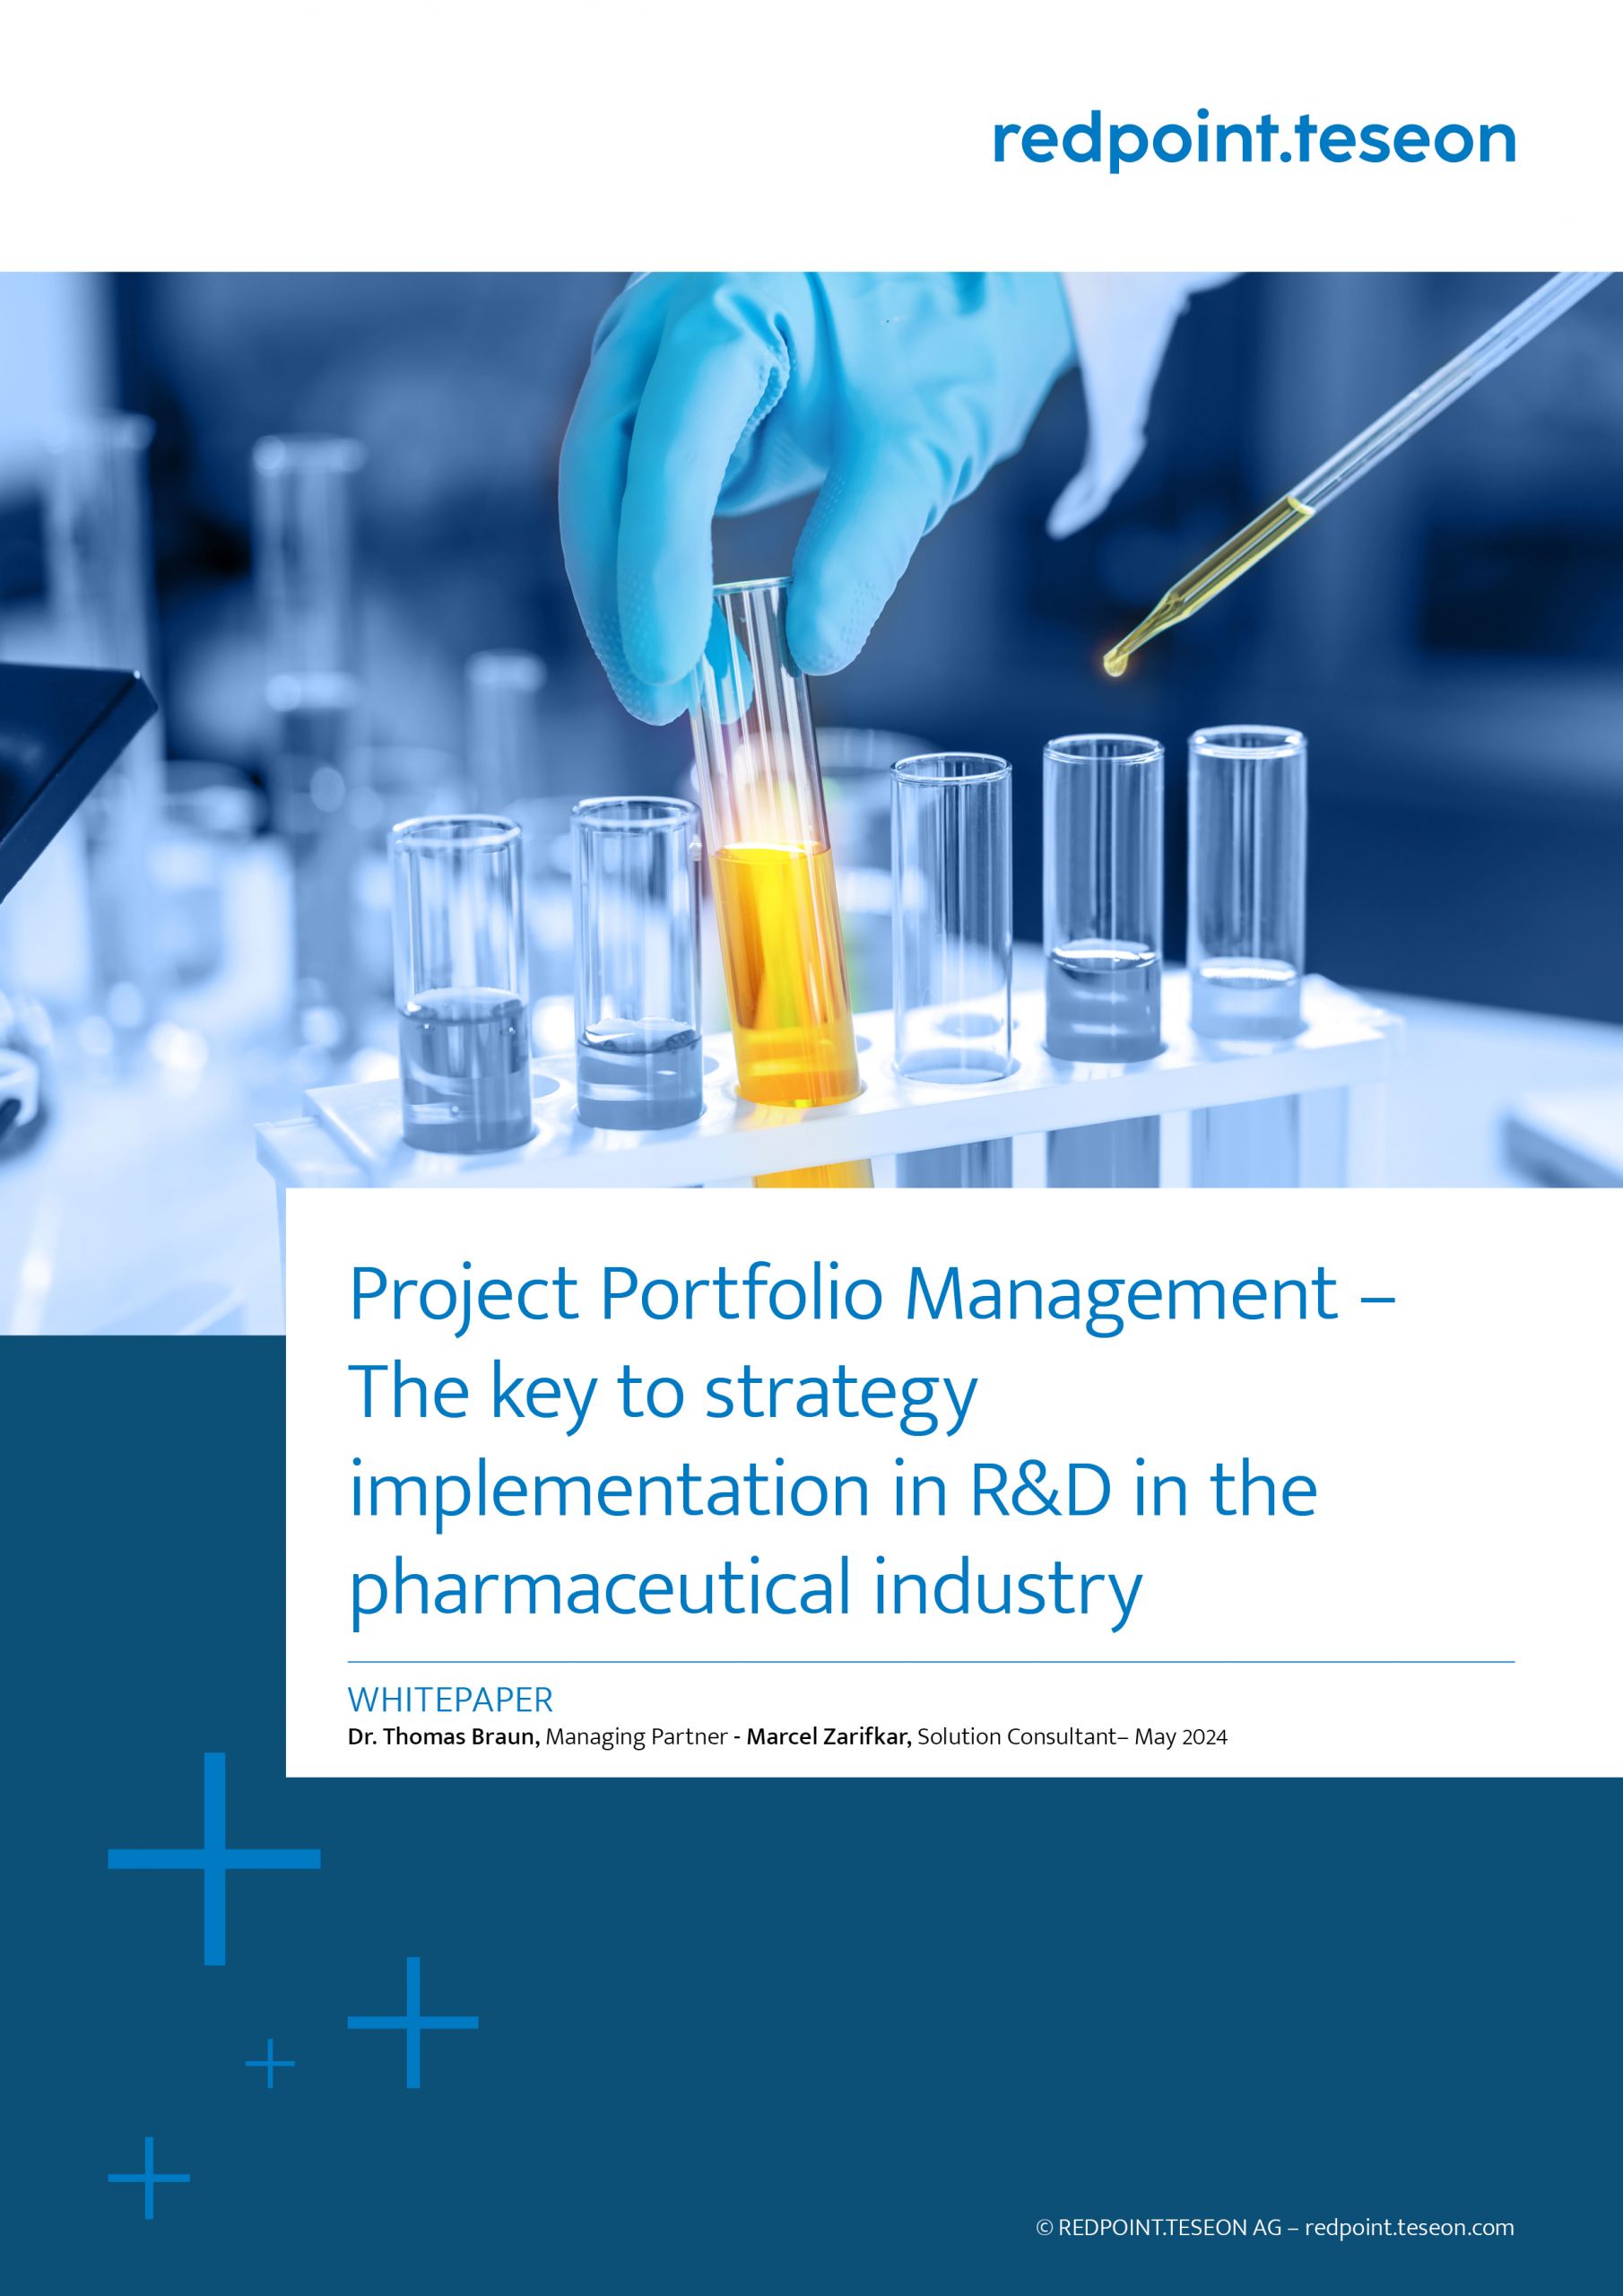 WHITEPAPER PPM -THE KEY TO STRATEGY IMPLEMENTATION IN R&D IN THE PHARMACEUTICAL INDUSTRY